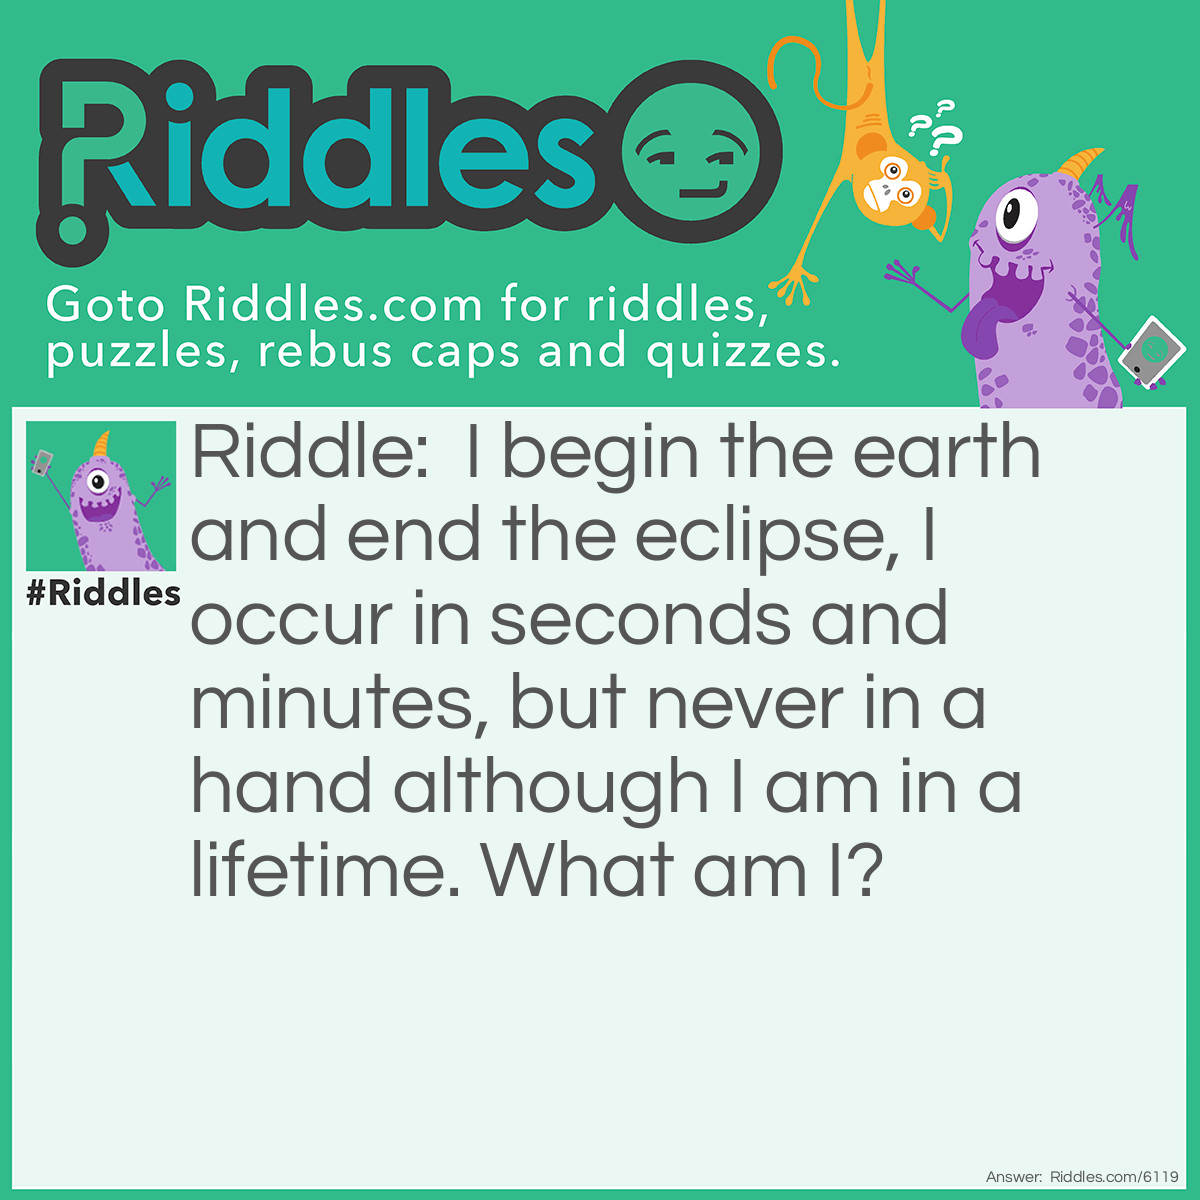 Riddle: I begin the earth and end the eclipse, I occur in seconds and minutes, but never in a hand although I am in a lifetime. What am I? Answer: Letter E.